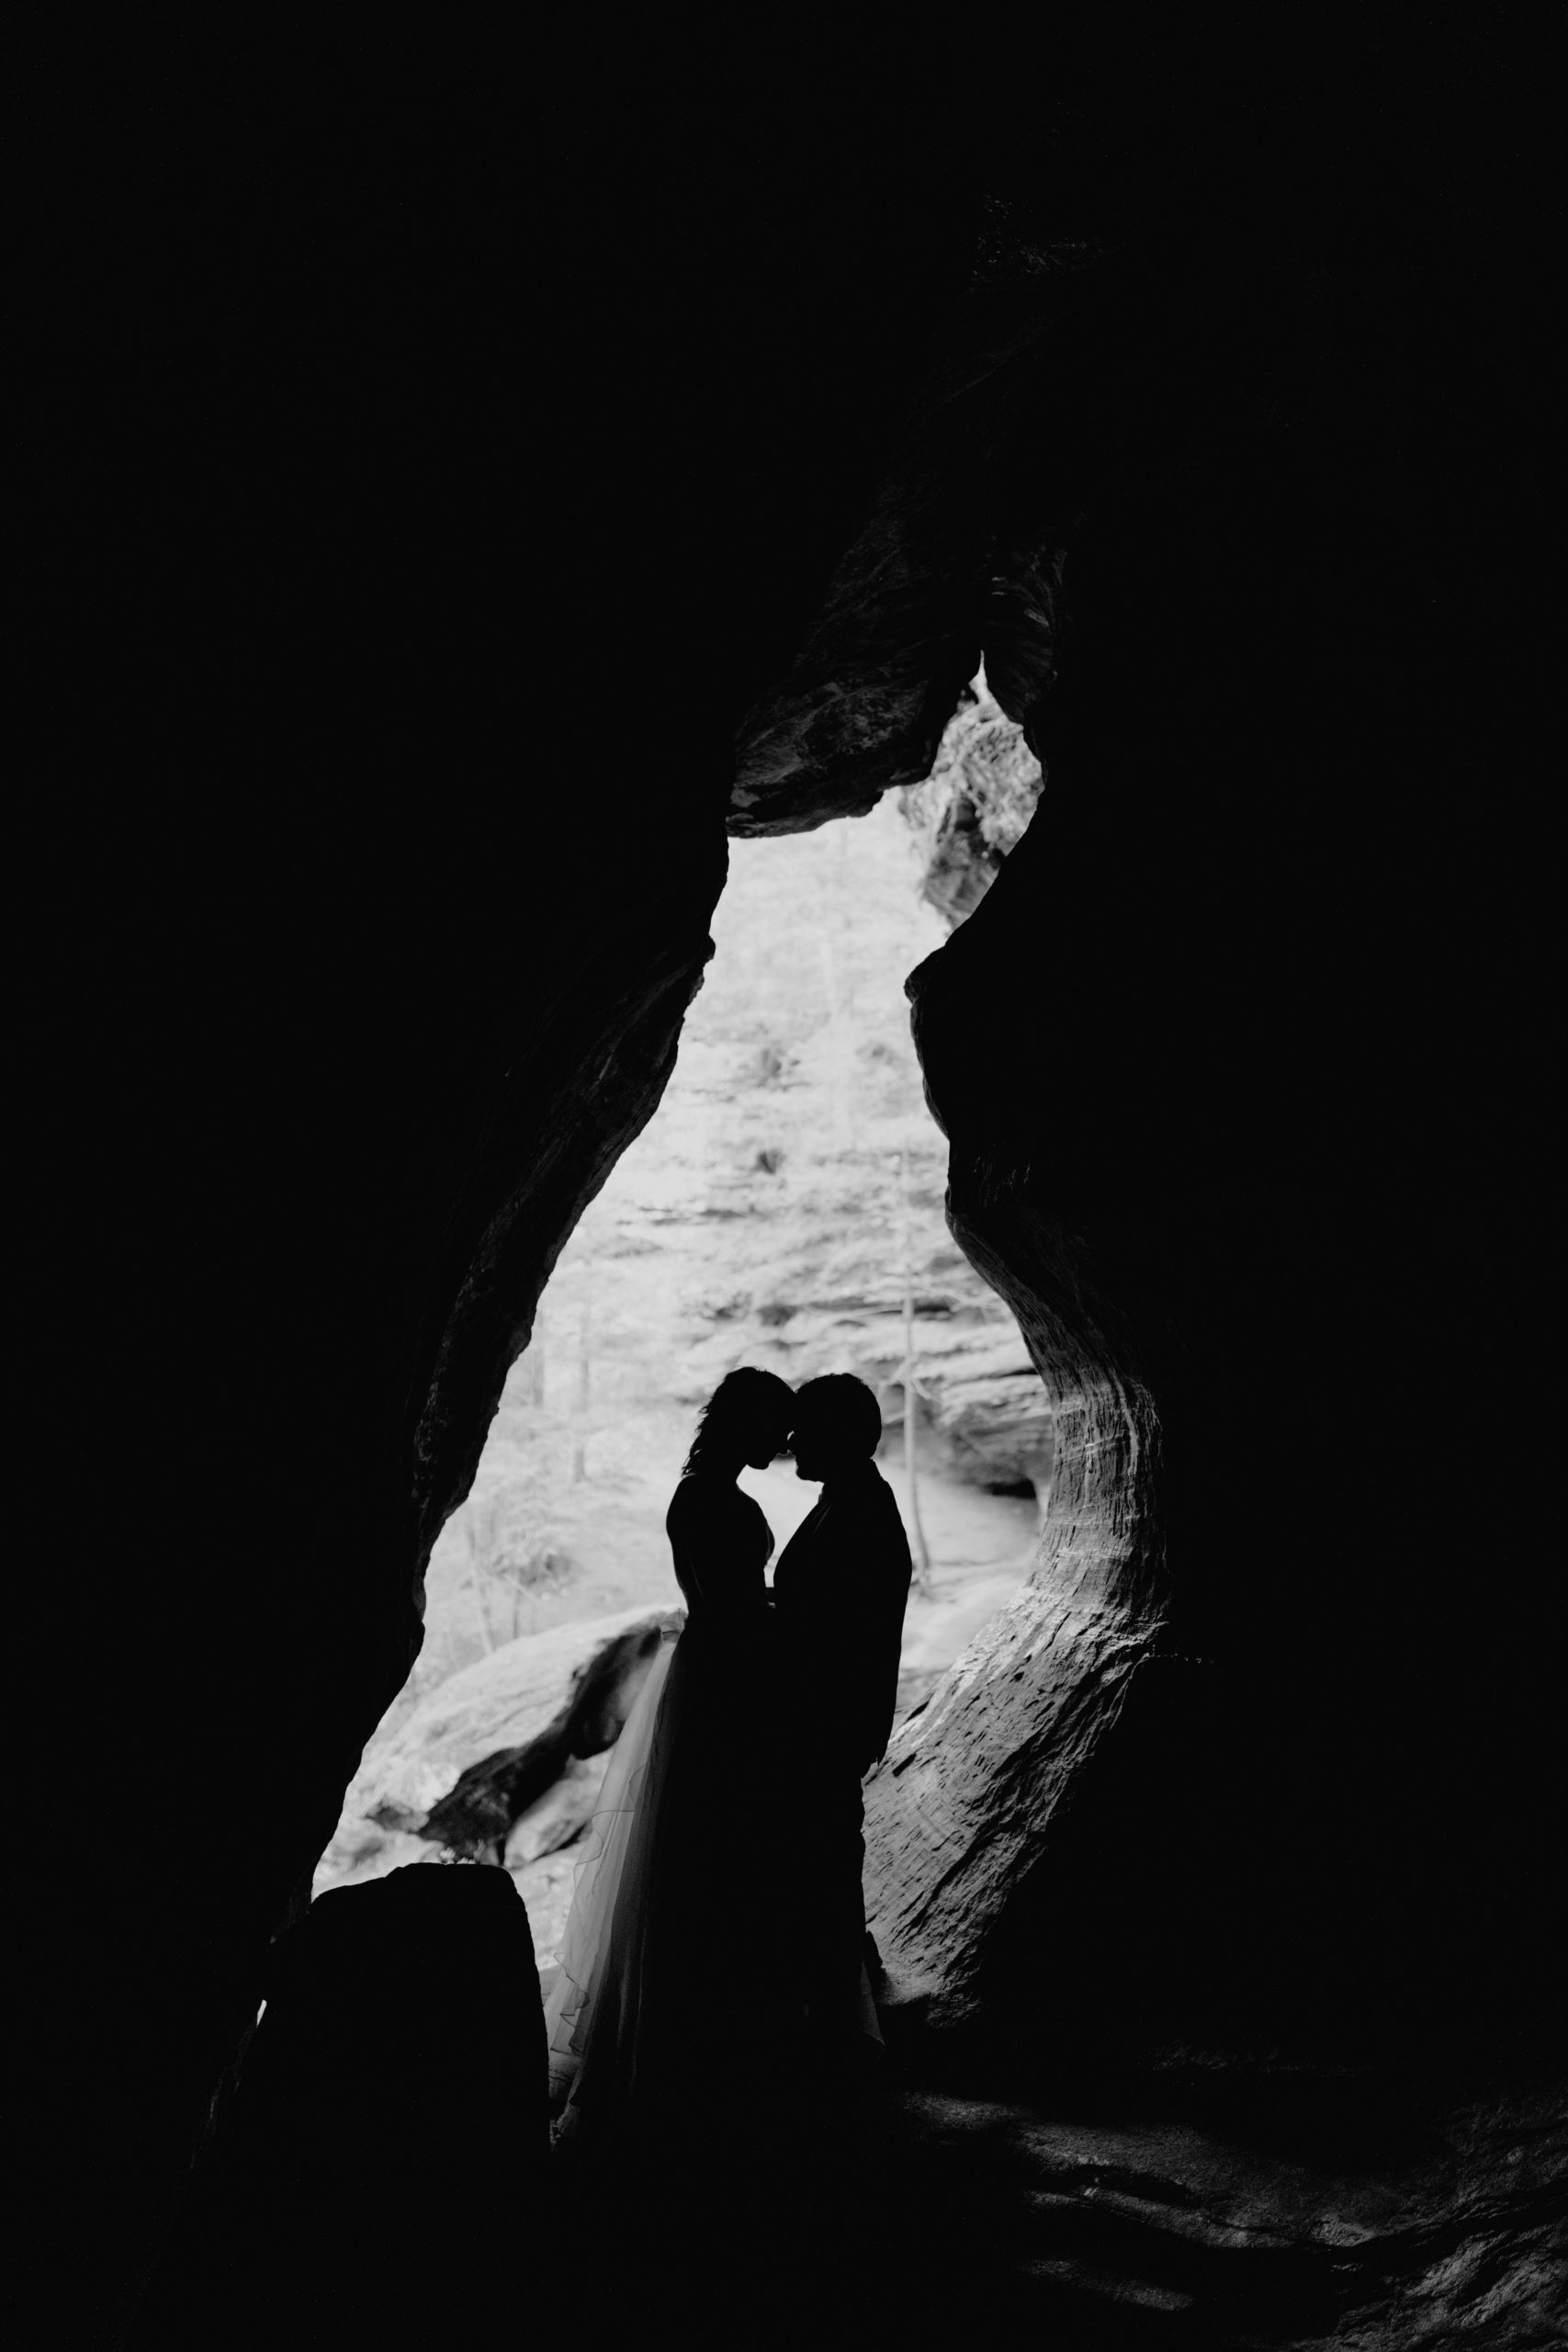 A hocking Hills Elopement couple posing in a cave entrance. The couples silhouette is filling the frame of the cave and the photo was taken in black & white